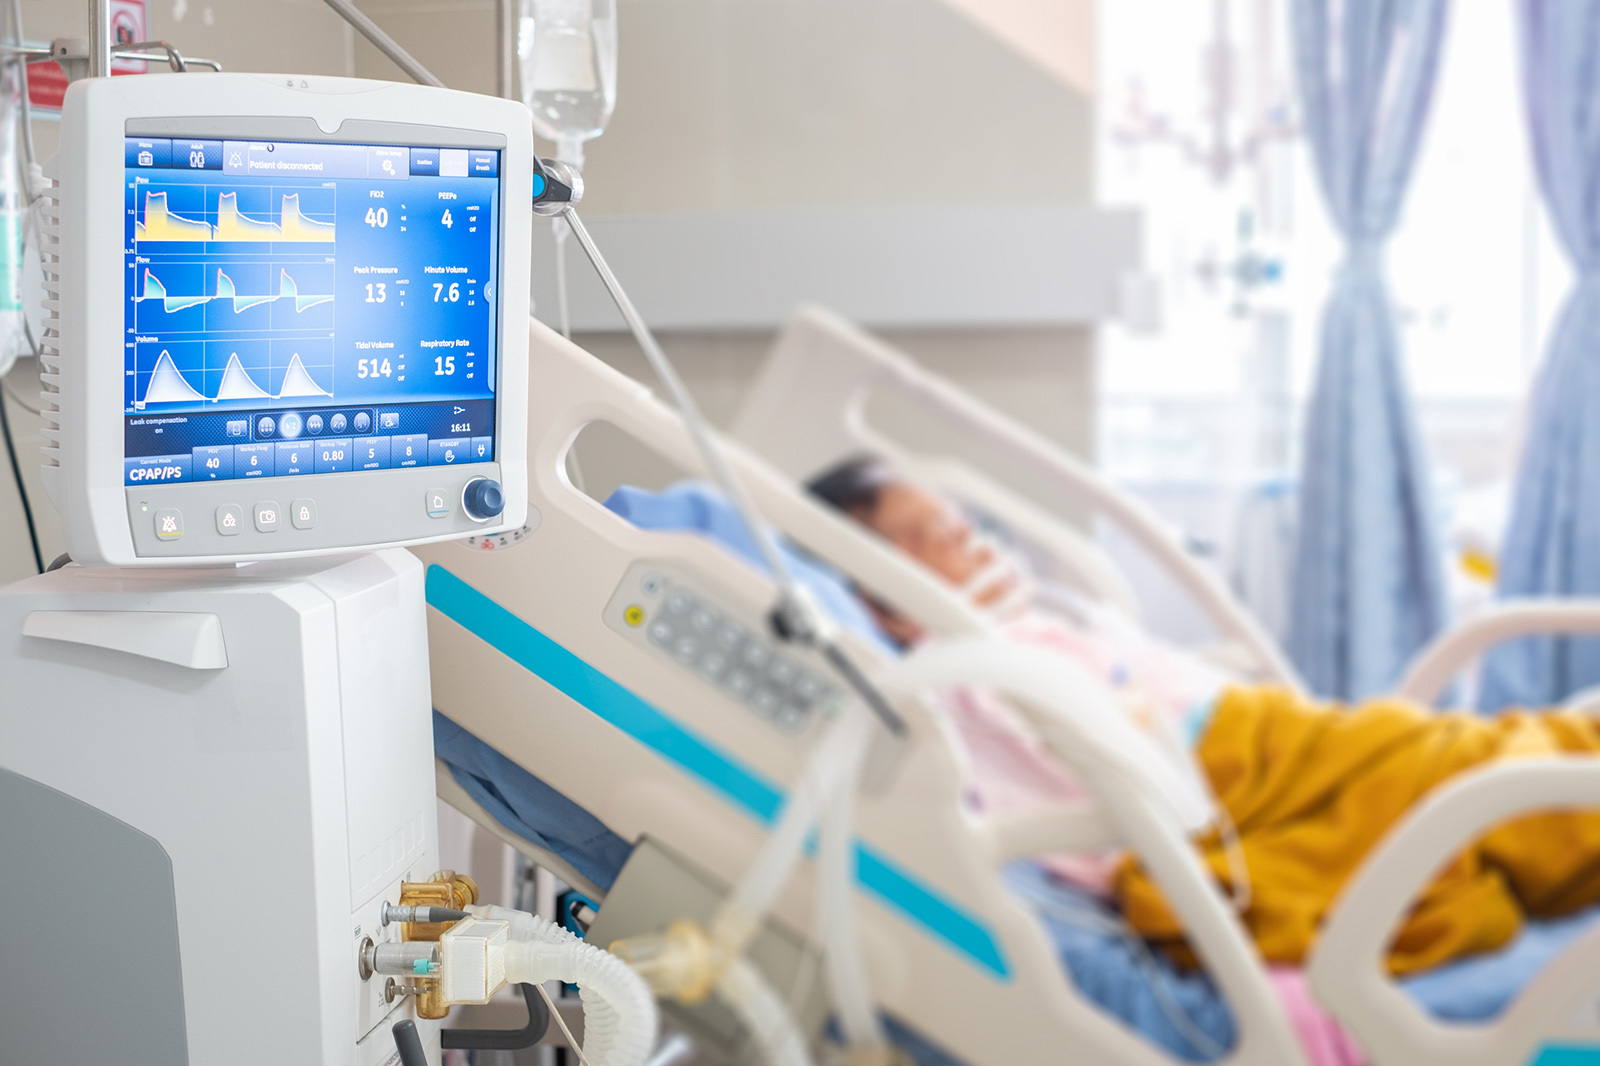 Ventilator monitor given oxygen by intubation tube to patient